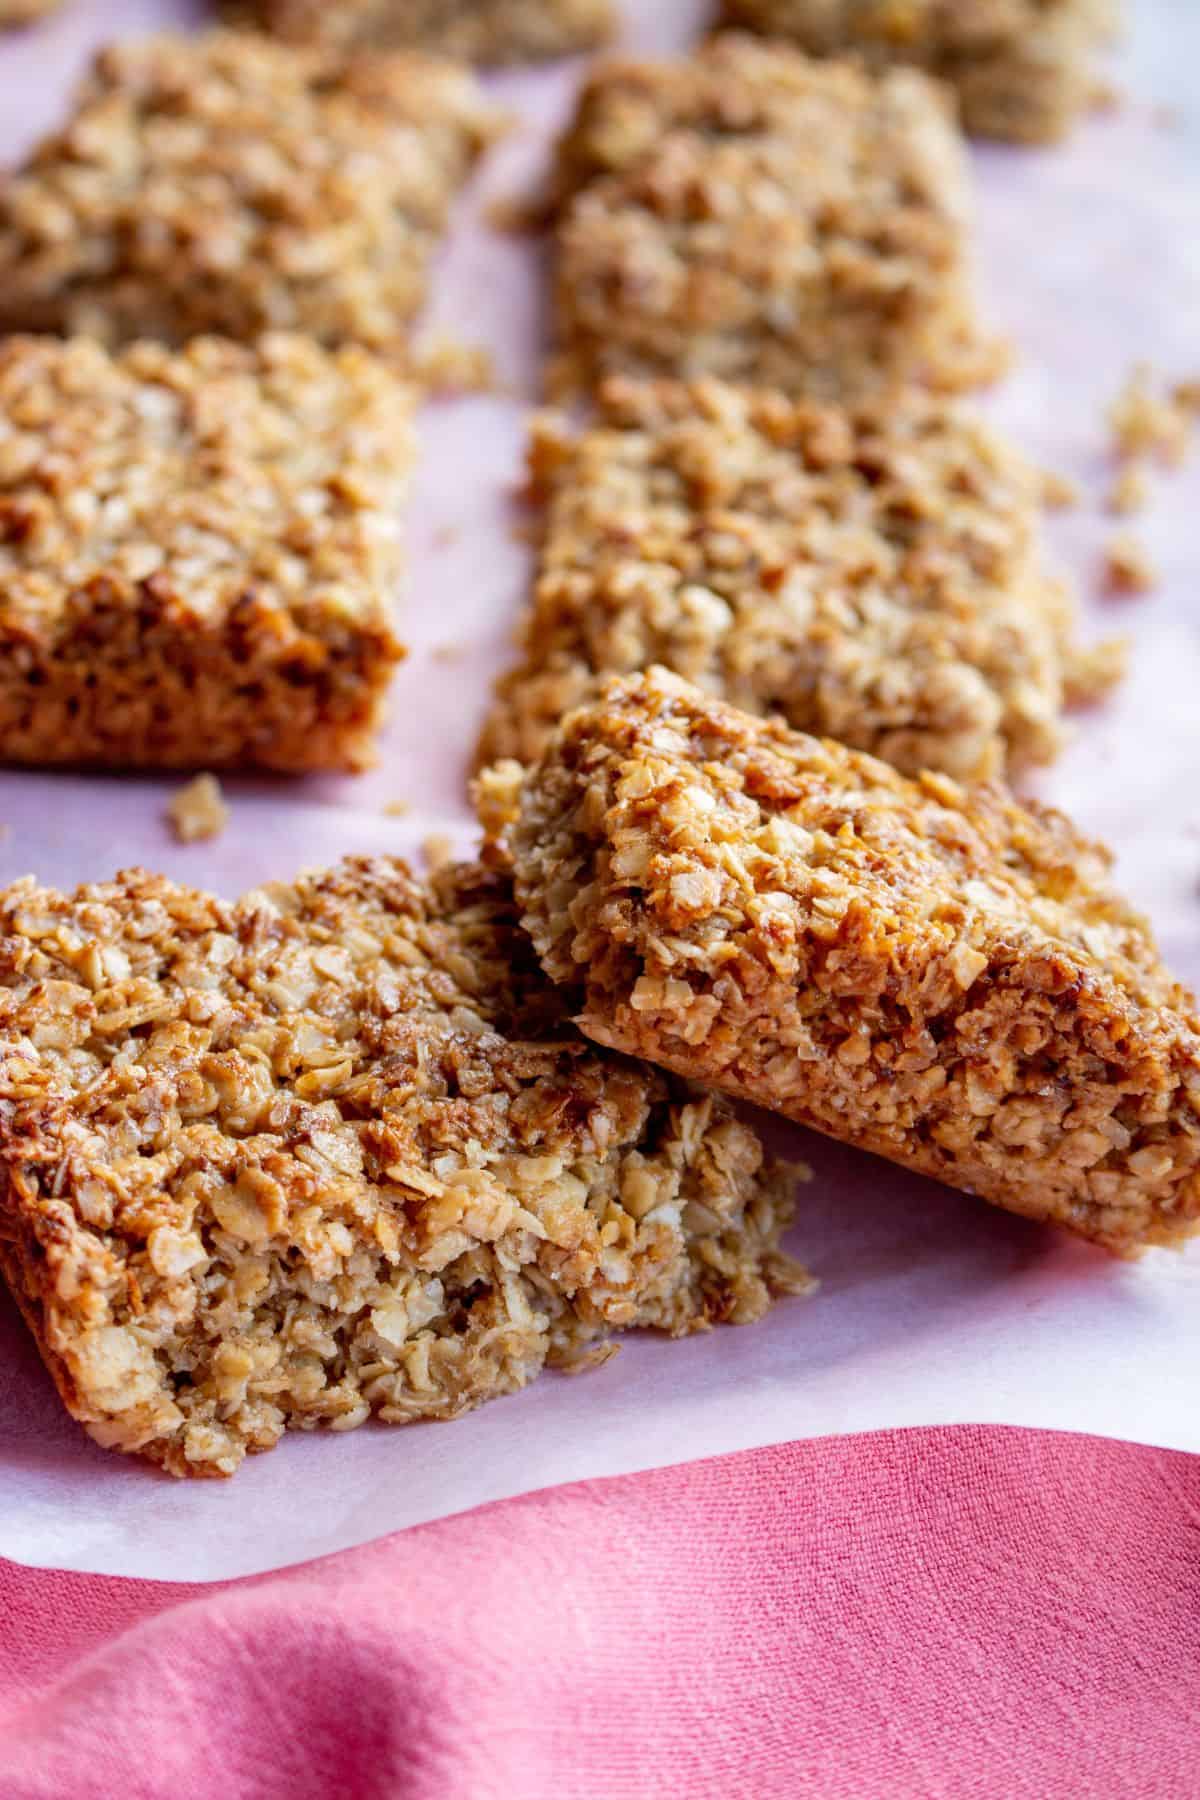 Flapjacks cut in rectangular pieces and scattered over parchment paper with crumbs on a pink cloth.